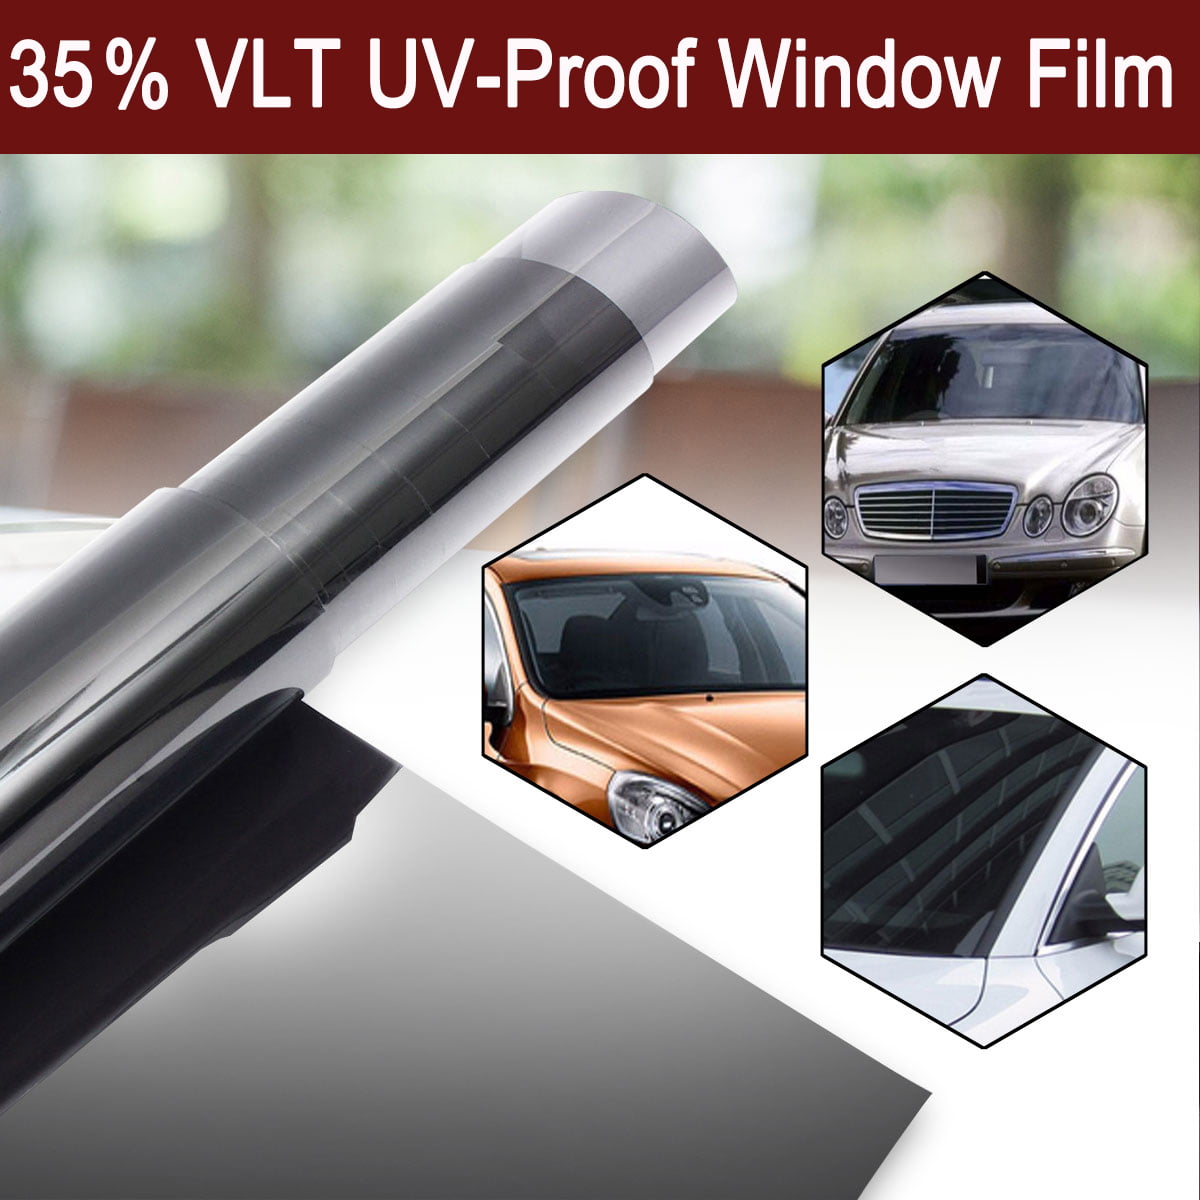 Mkbrother Uncut Roll Window Tint Film 20% VLT 36 in x 15 Ft Feet Car Home Office Glasss